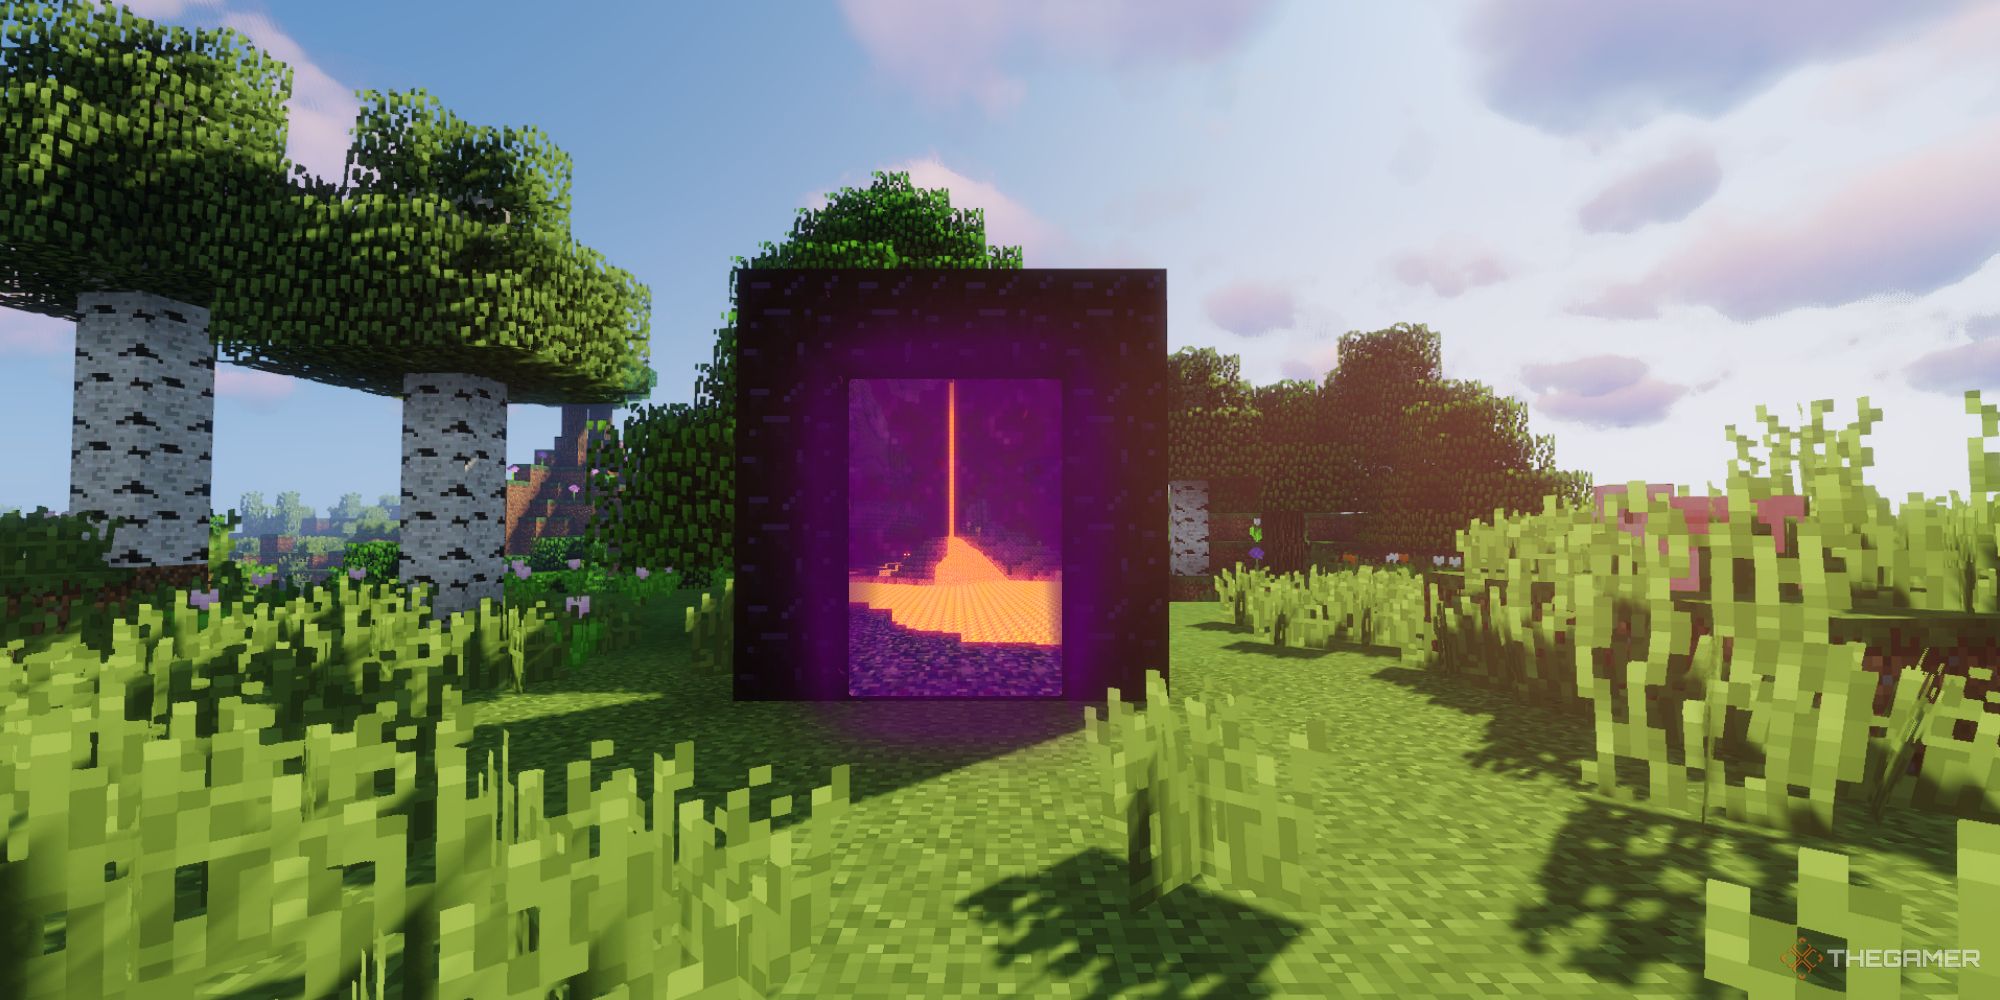 Minecraft With Shaders: a Nether portal is in a field, the Nether visible through it.